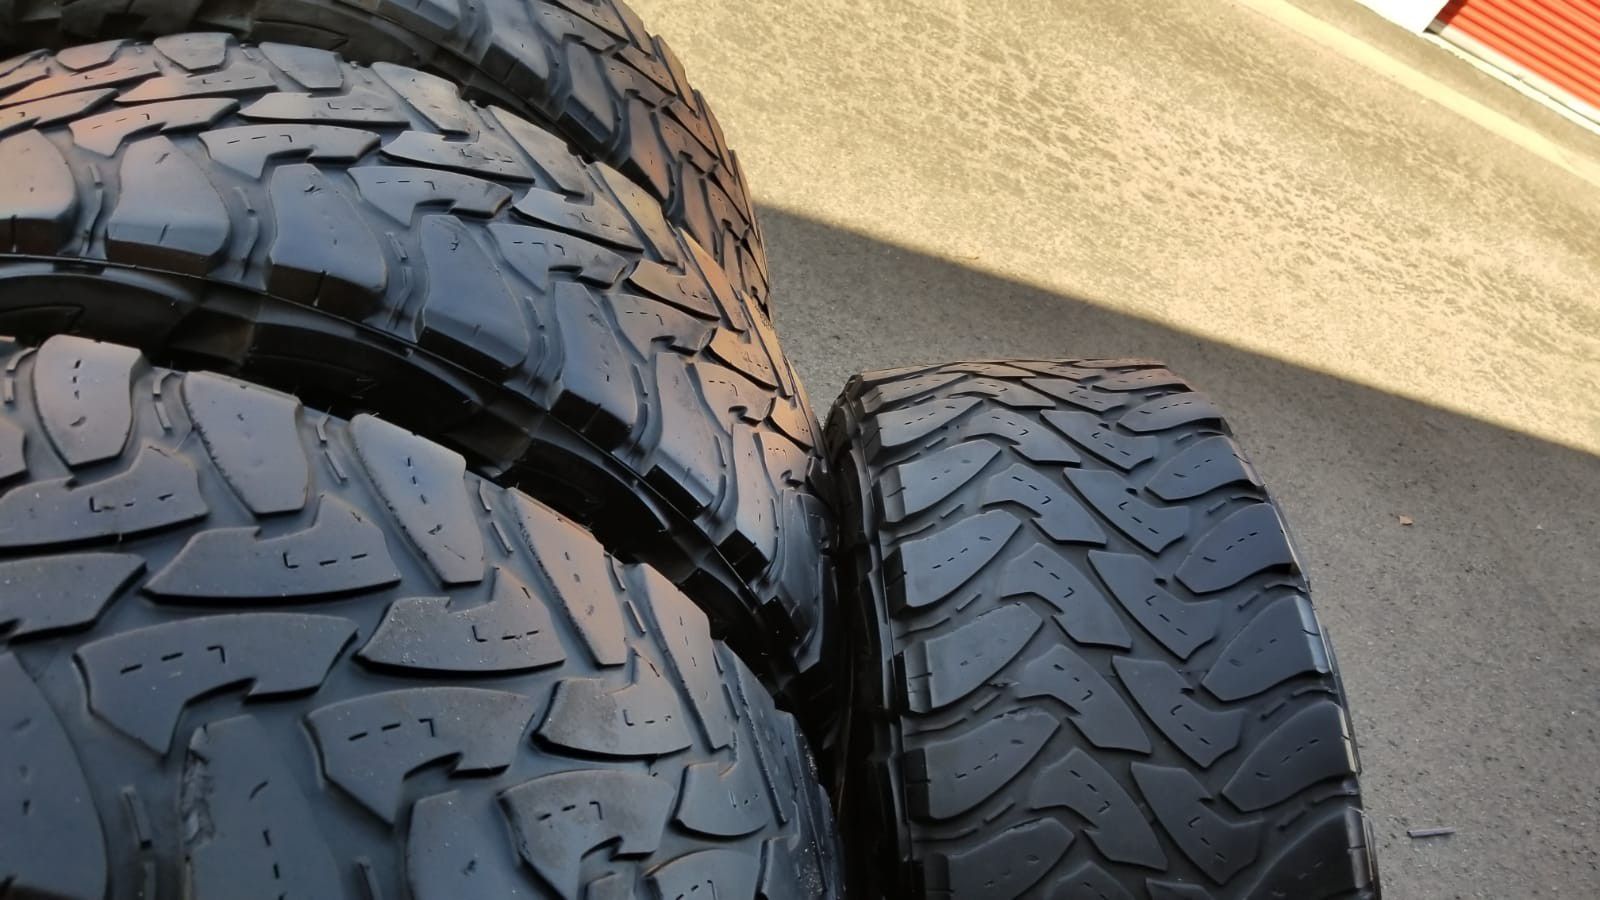 4 tires Lt37x12.50r22 toyo M/T open country very good tread on $350.00 all 4